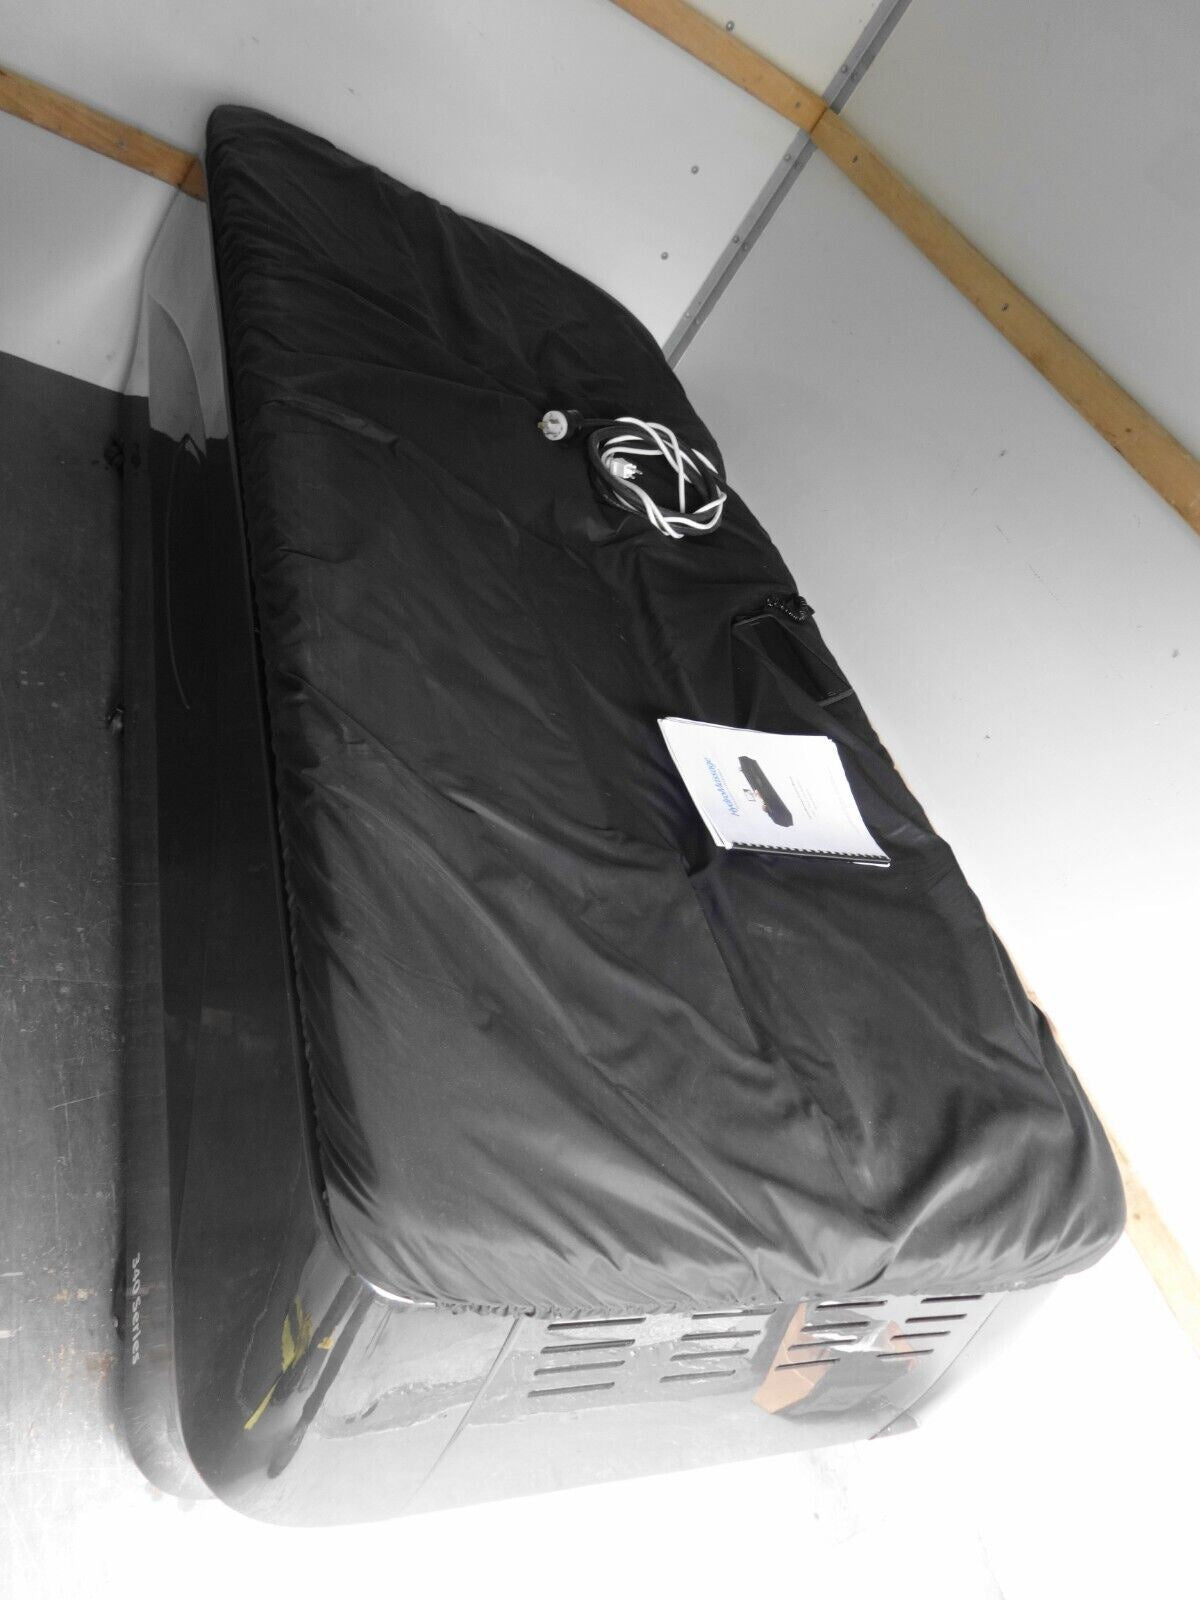 HYDROMASSAGE BED RF-S300 - EXCELLENT CONDITION - PRIVATELY OWNED